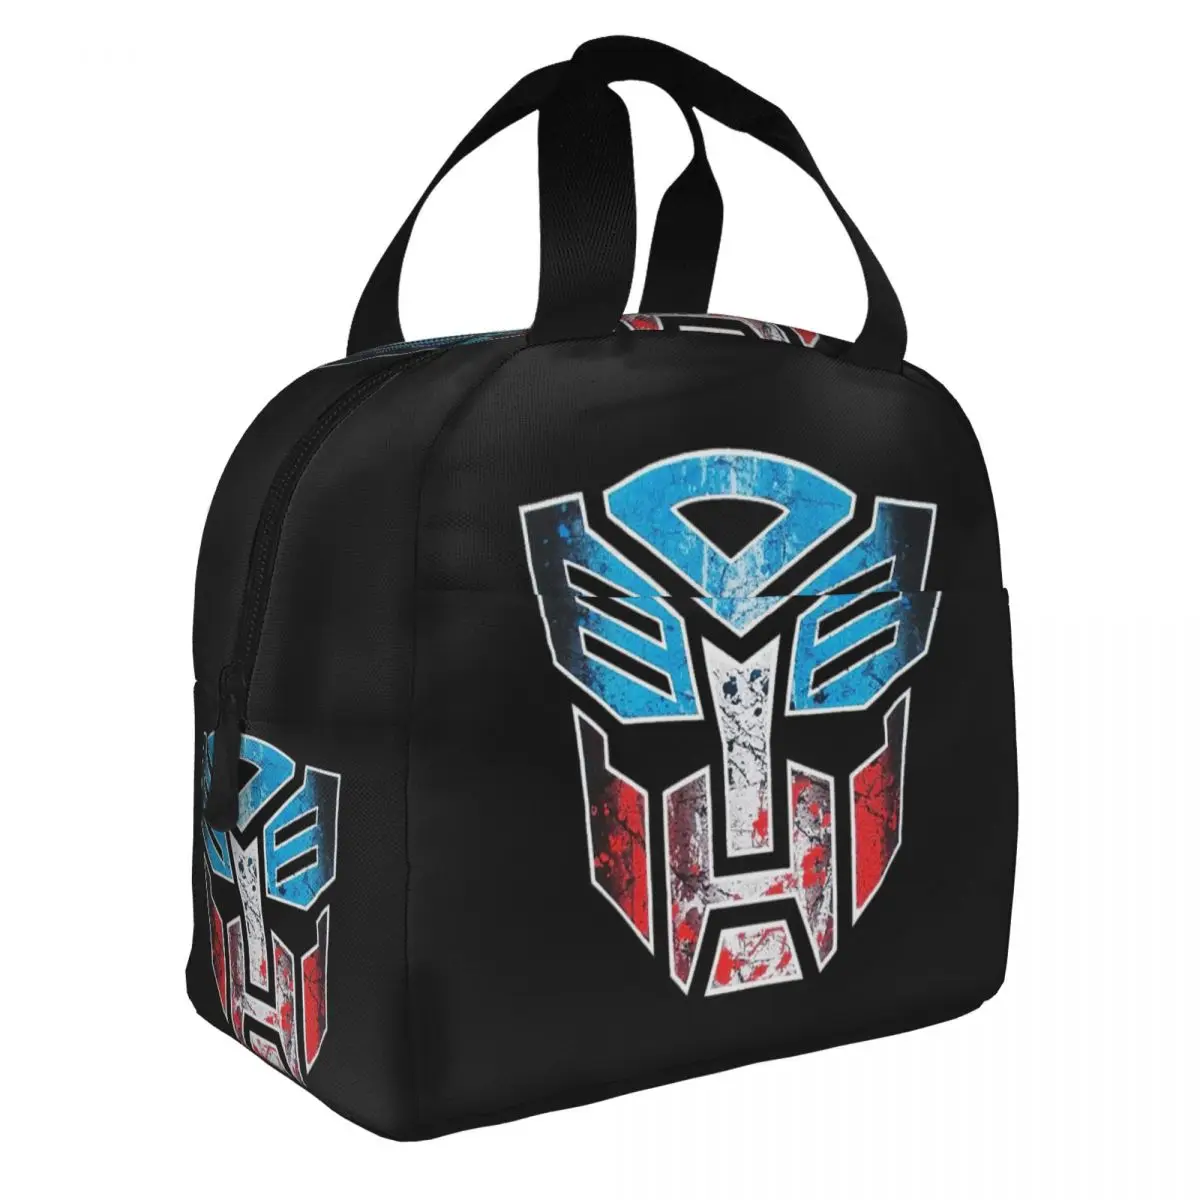 Transformers Lunch Bento Bags Portable Aluminum Foil thickened Thermal Cloth Lunch Bag for Women Men Boy